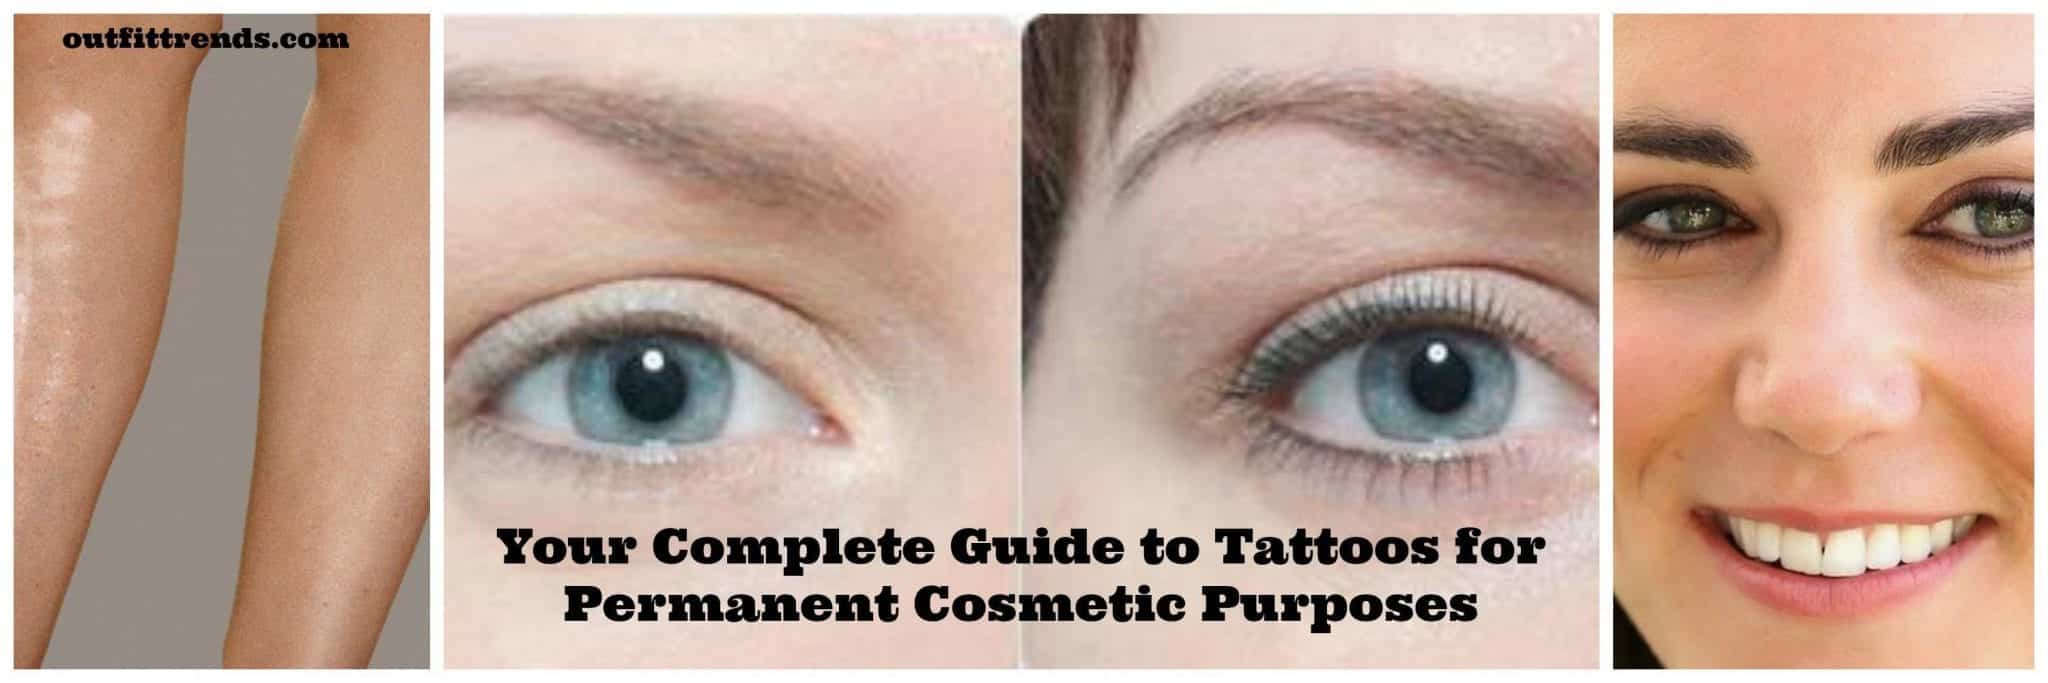 Tattoos For Permanent Cosmetic Purposes – Complete Guide